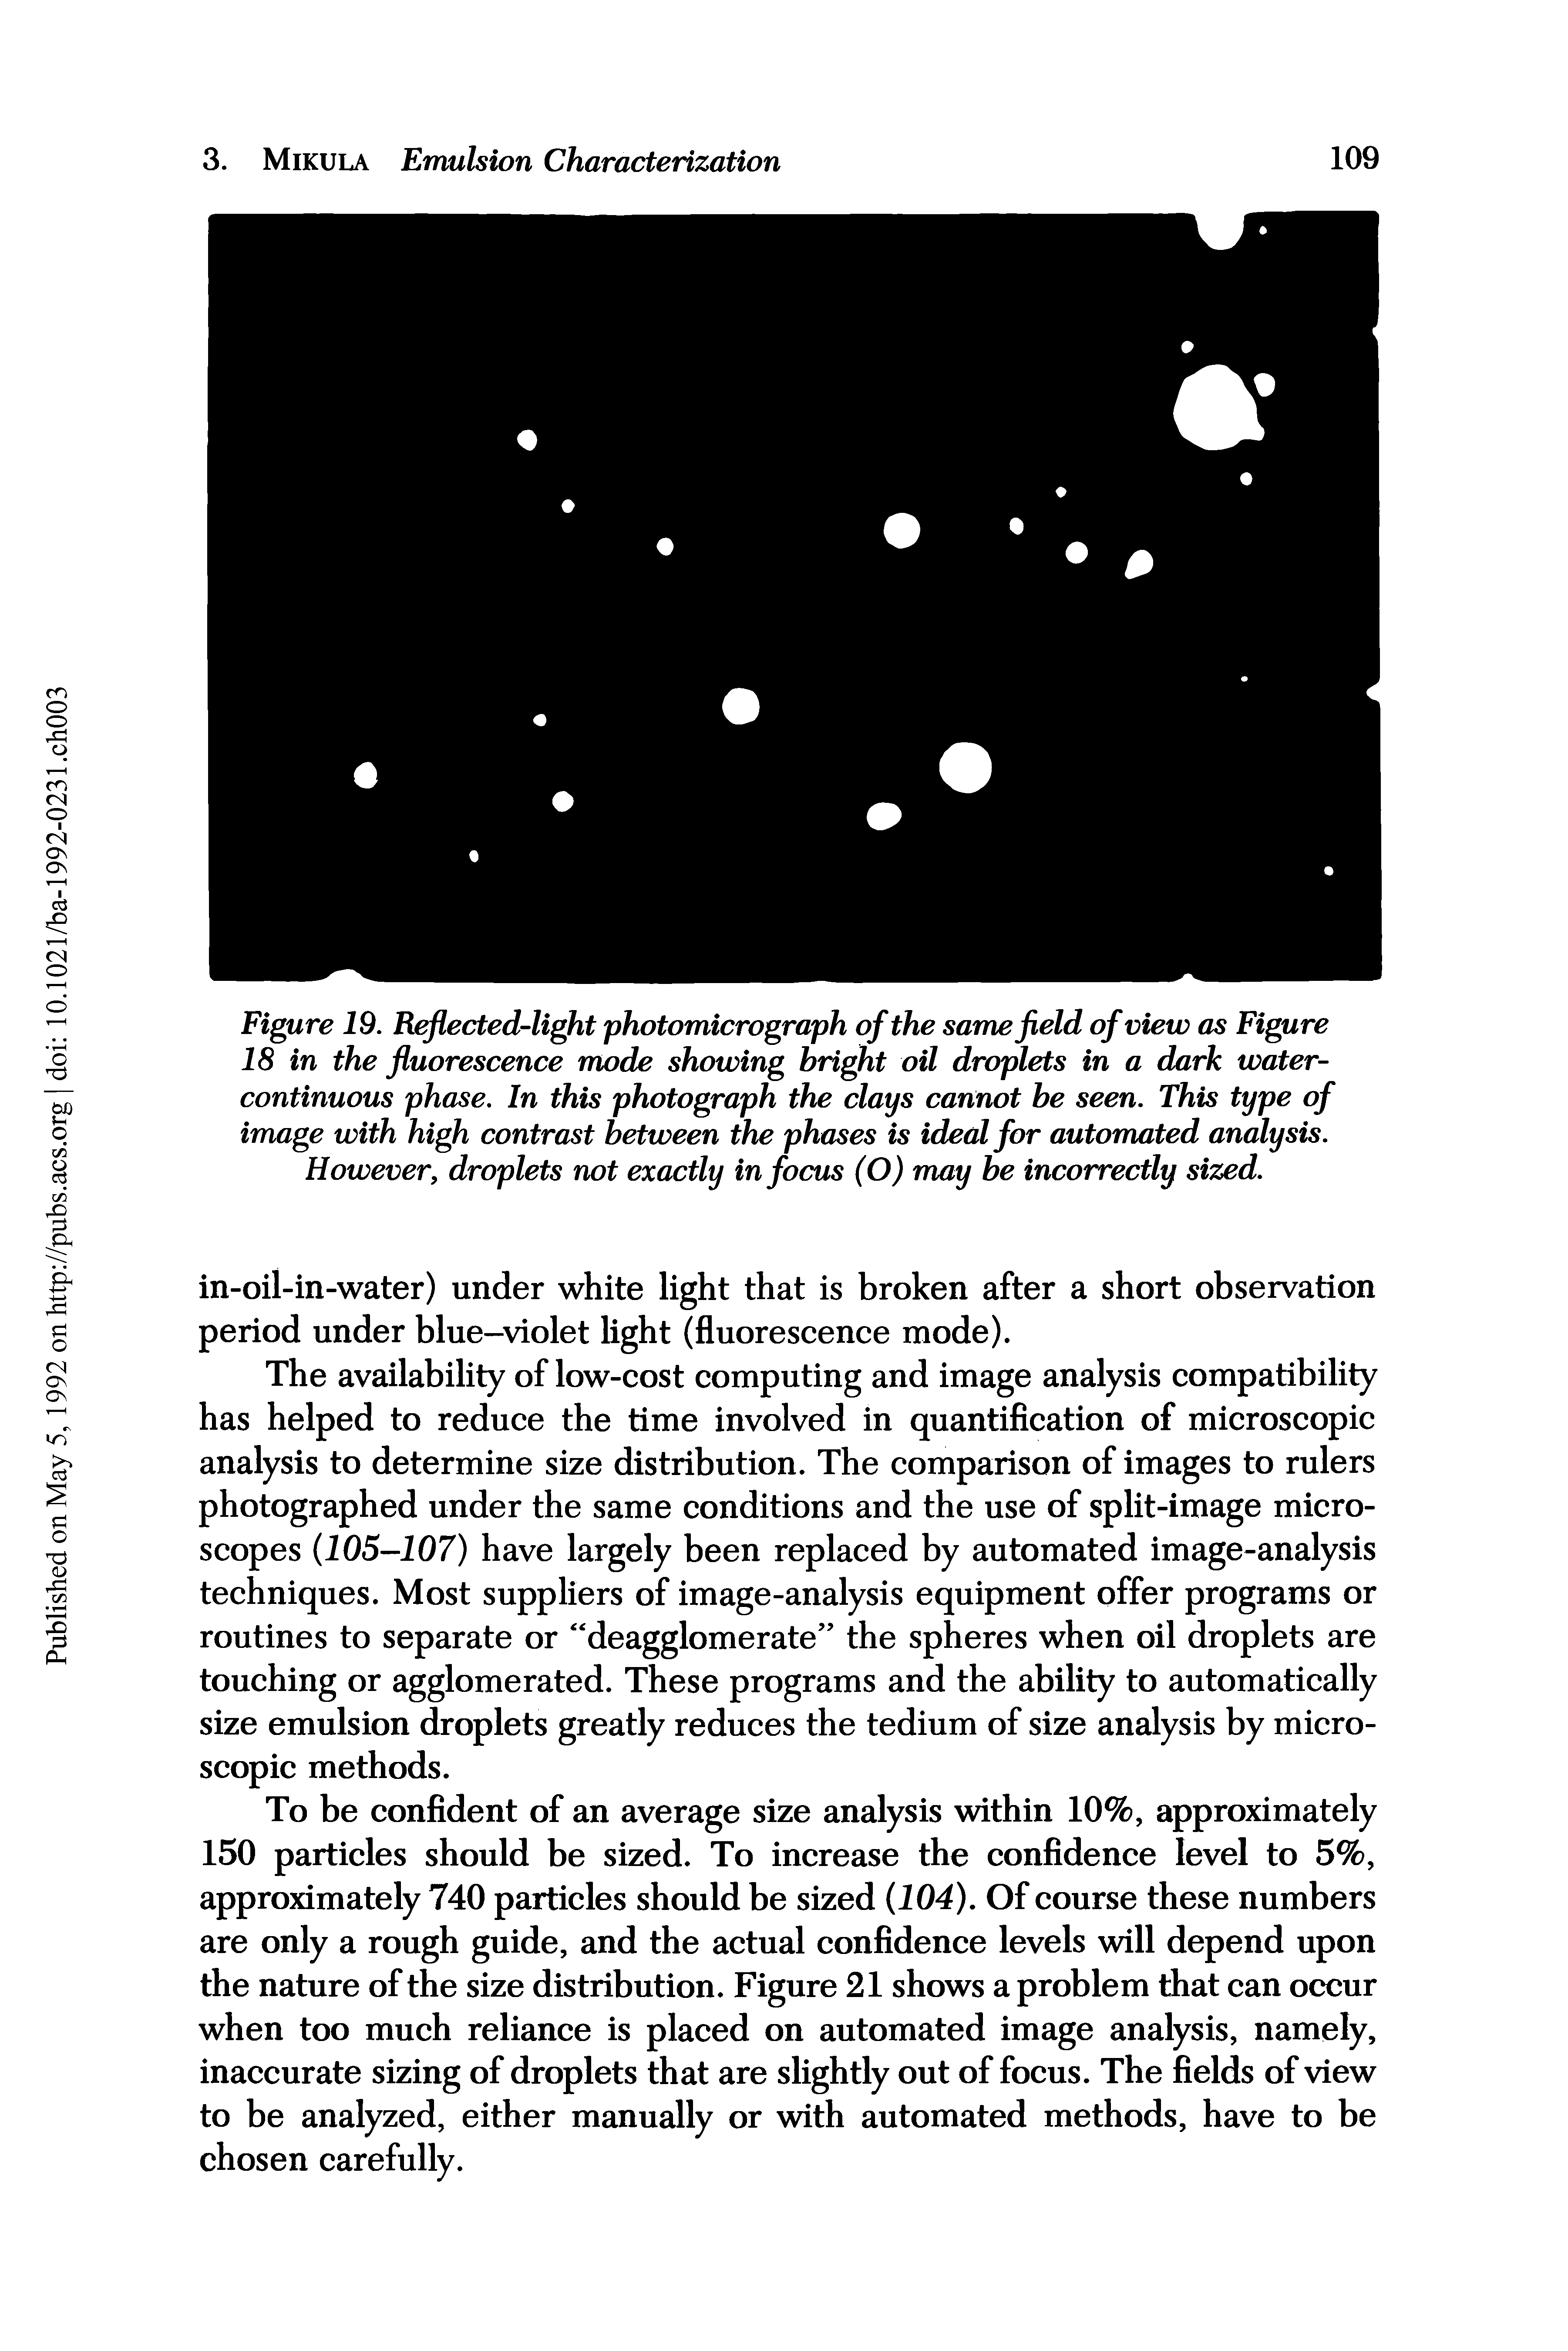 Figure 19. Reflected-light photomicrograph of the same field of view as Figure 18 in the fluorescence mode showing bright oil droplets in a dark water-continuous phase. In this photograph the clays cannot he seen. This type of image with high contrast between the phases is ideal for automated analysis. However, droplets not exactly in focus (O) may be incorrectly sized.